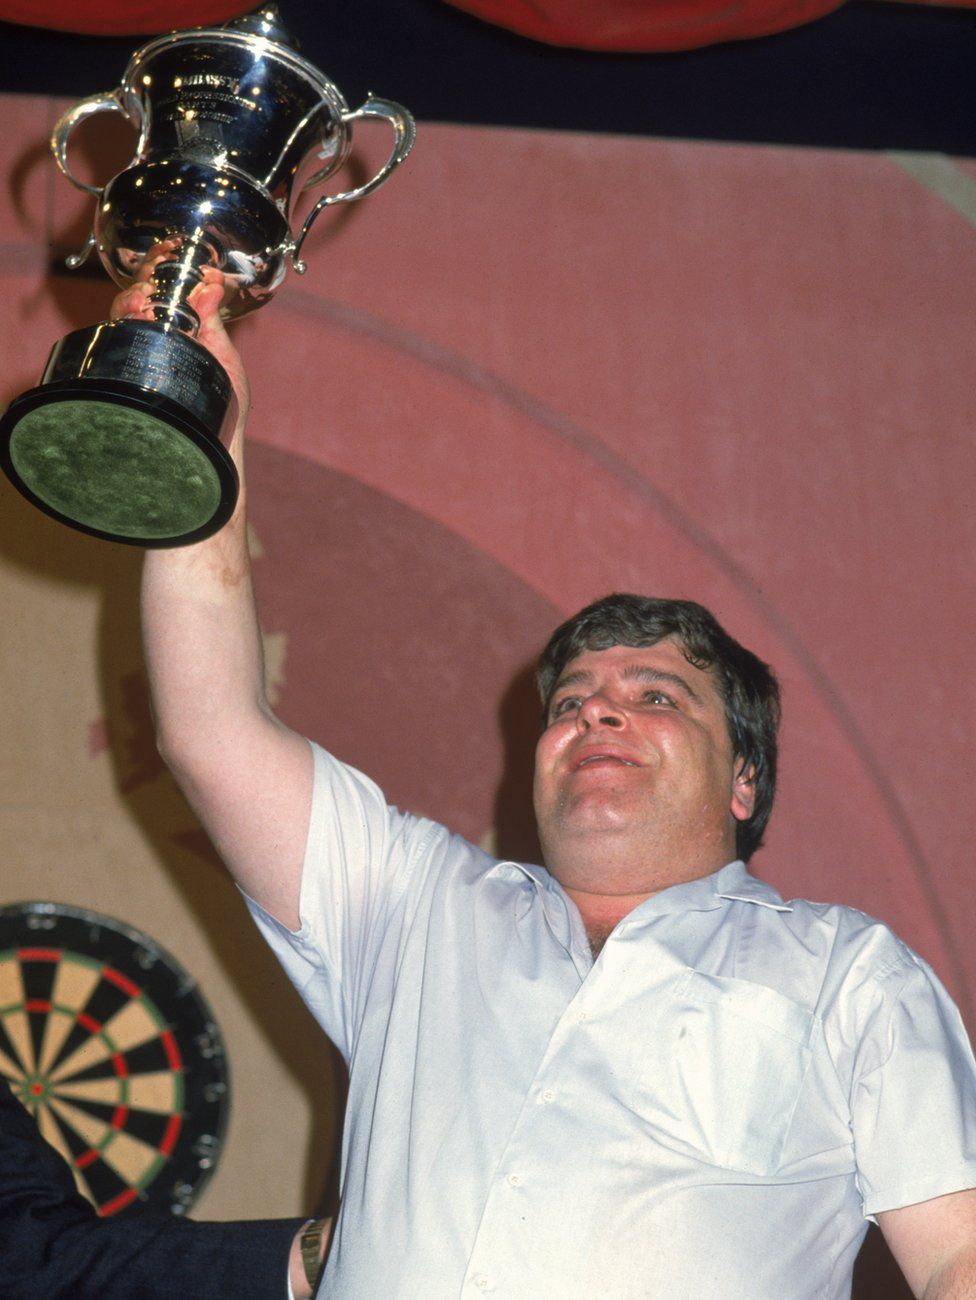 John Thomas Wilson, better known as Jocky, wins the 1989 Embassy World Darts Championship at Lakeside Country Club, Frimley Green, Surrey, 14th January 1989. (Photo by Chris Raphael/Getty Images)